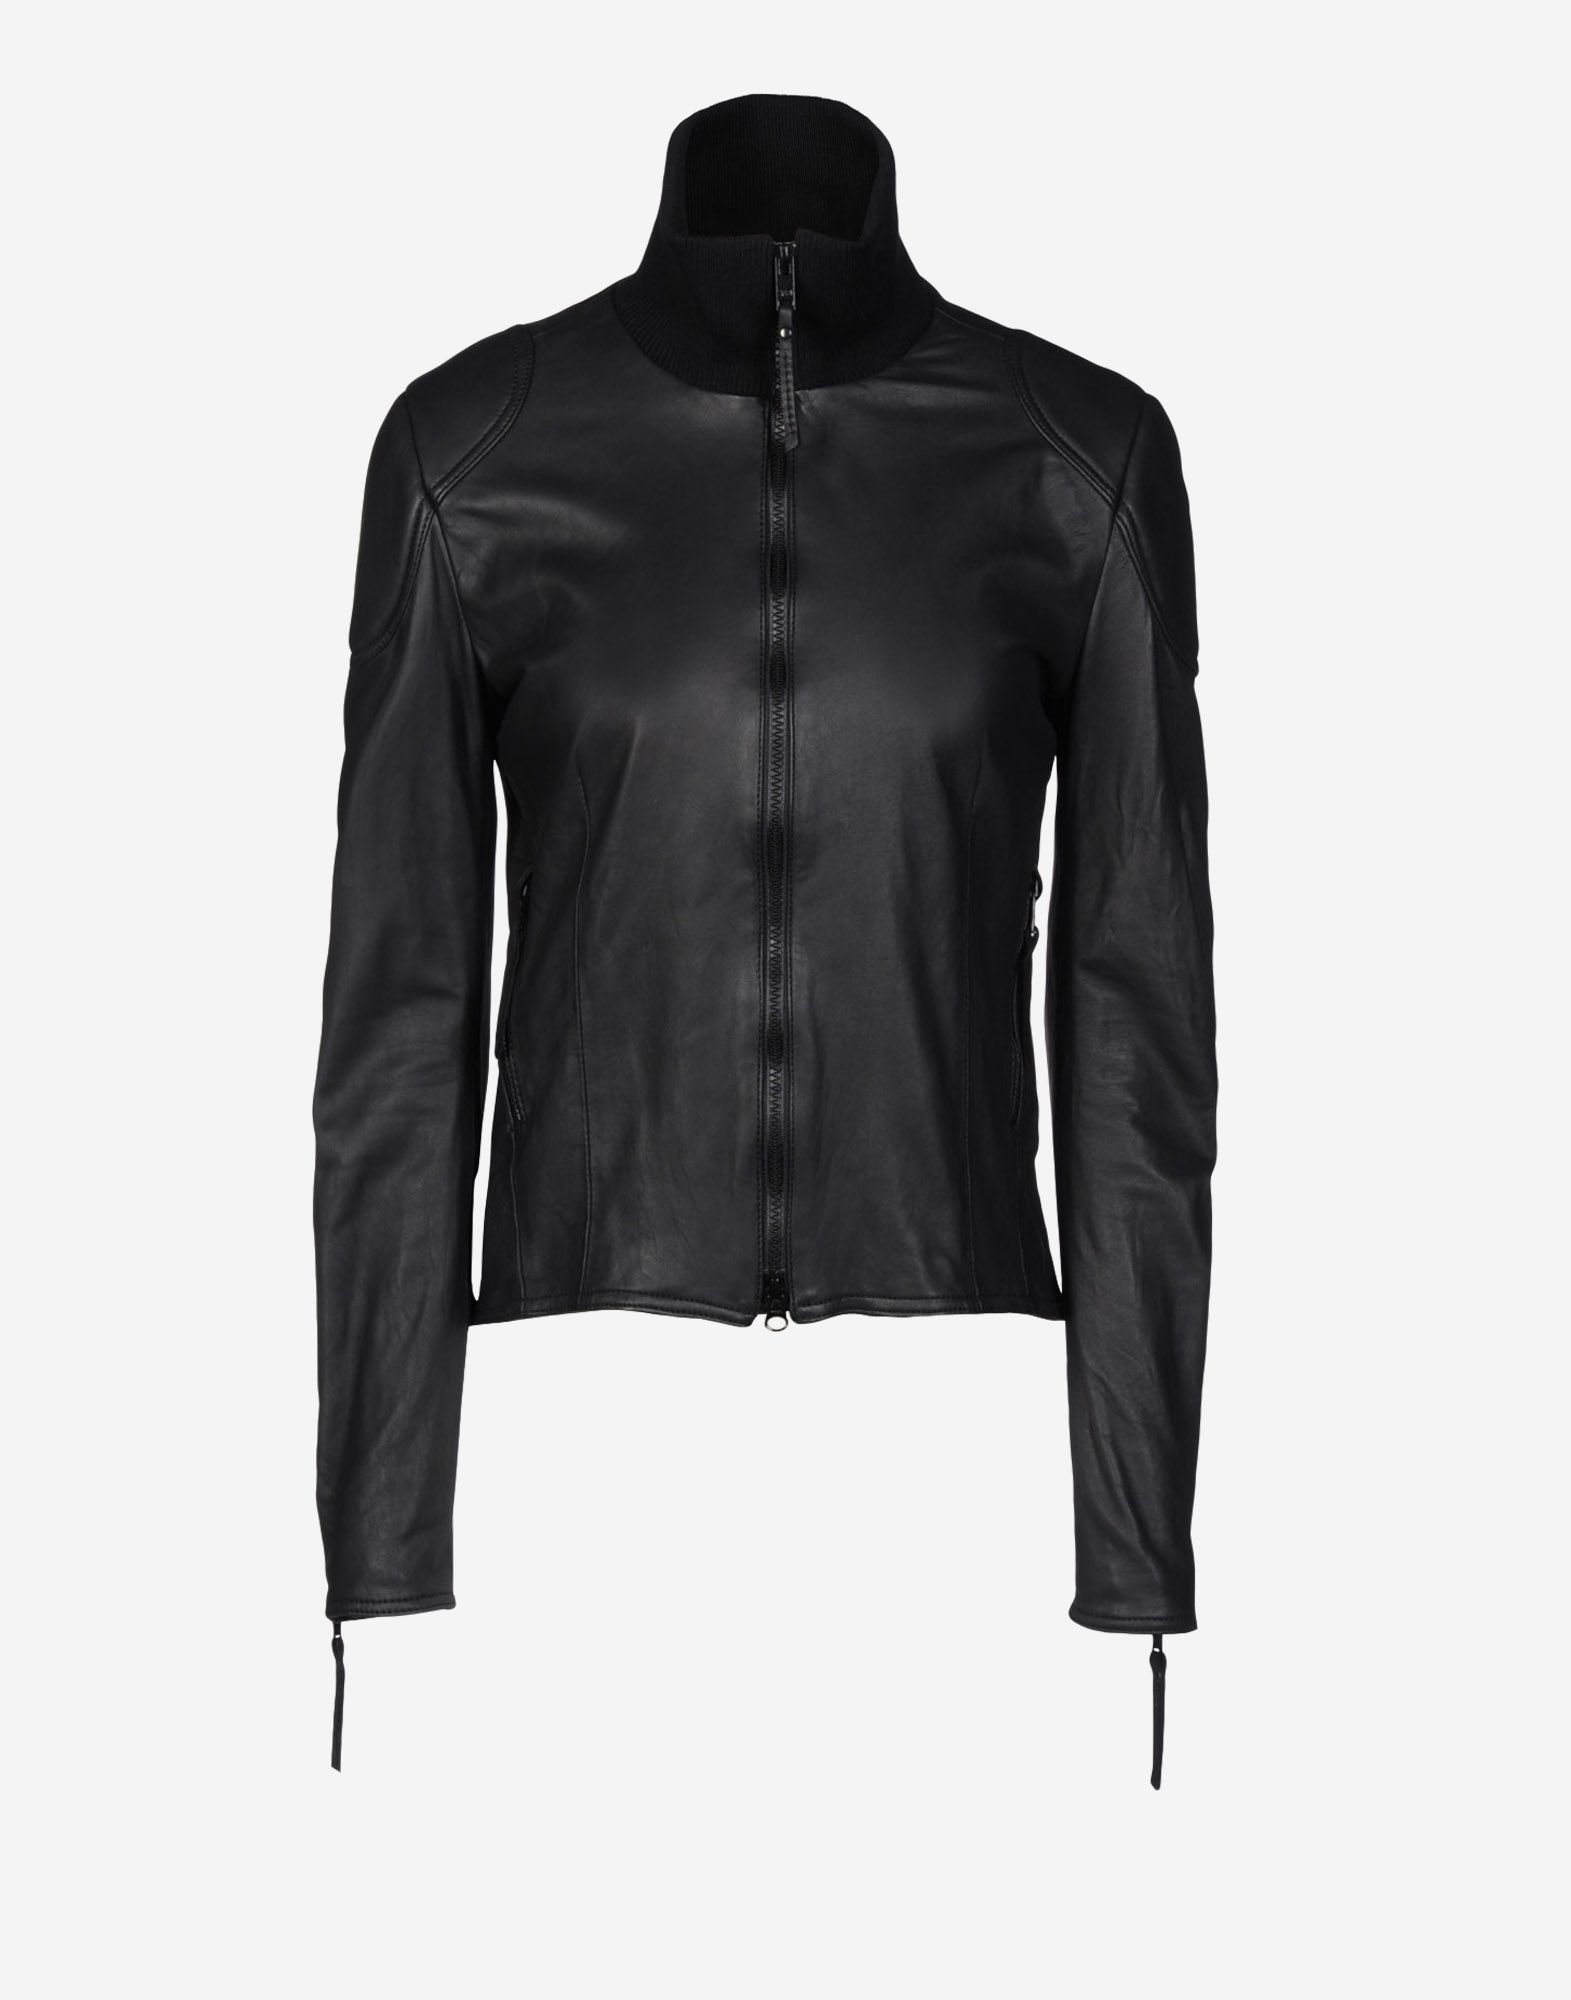 Y 3 Leather Jacket for Women | Adidas Y-3 Official Store